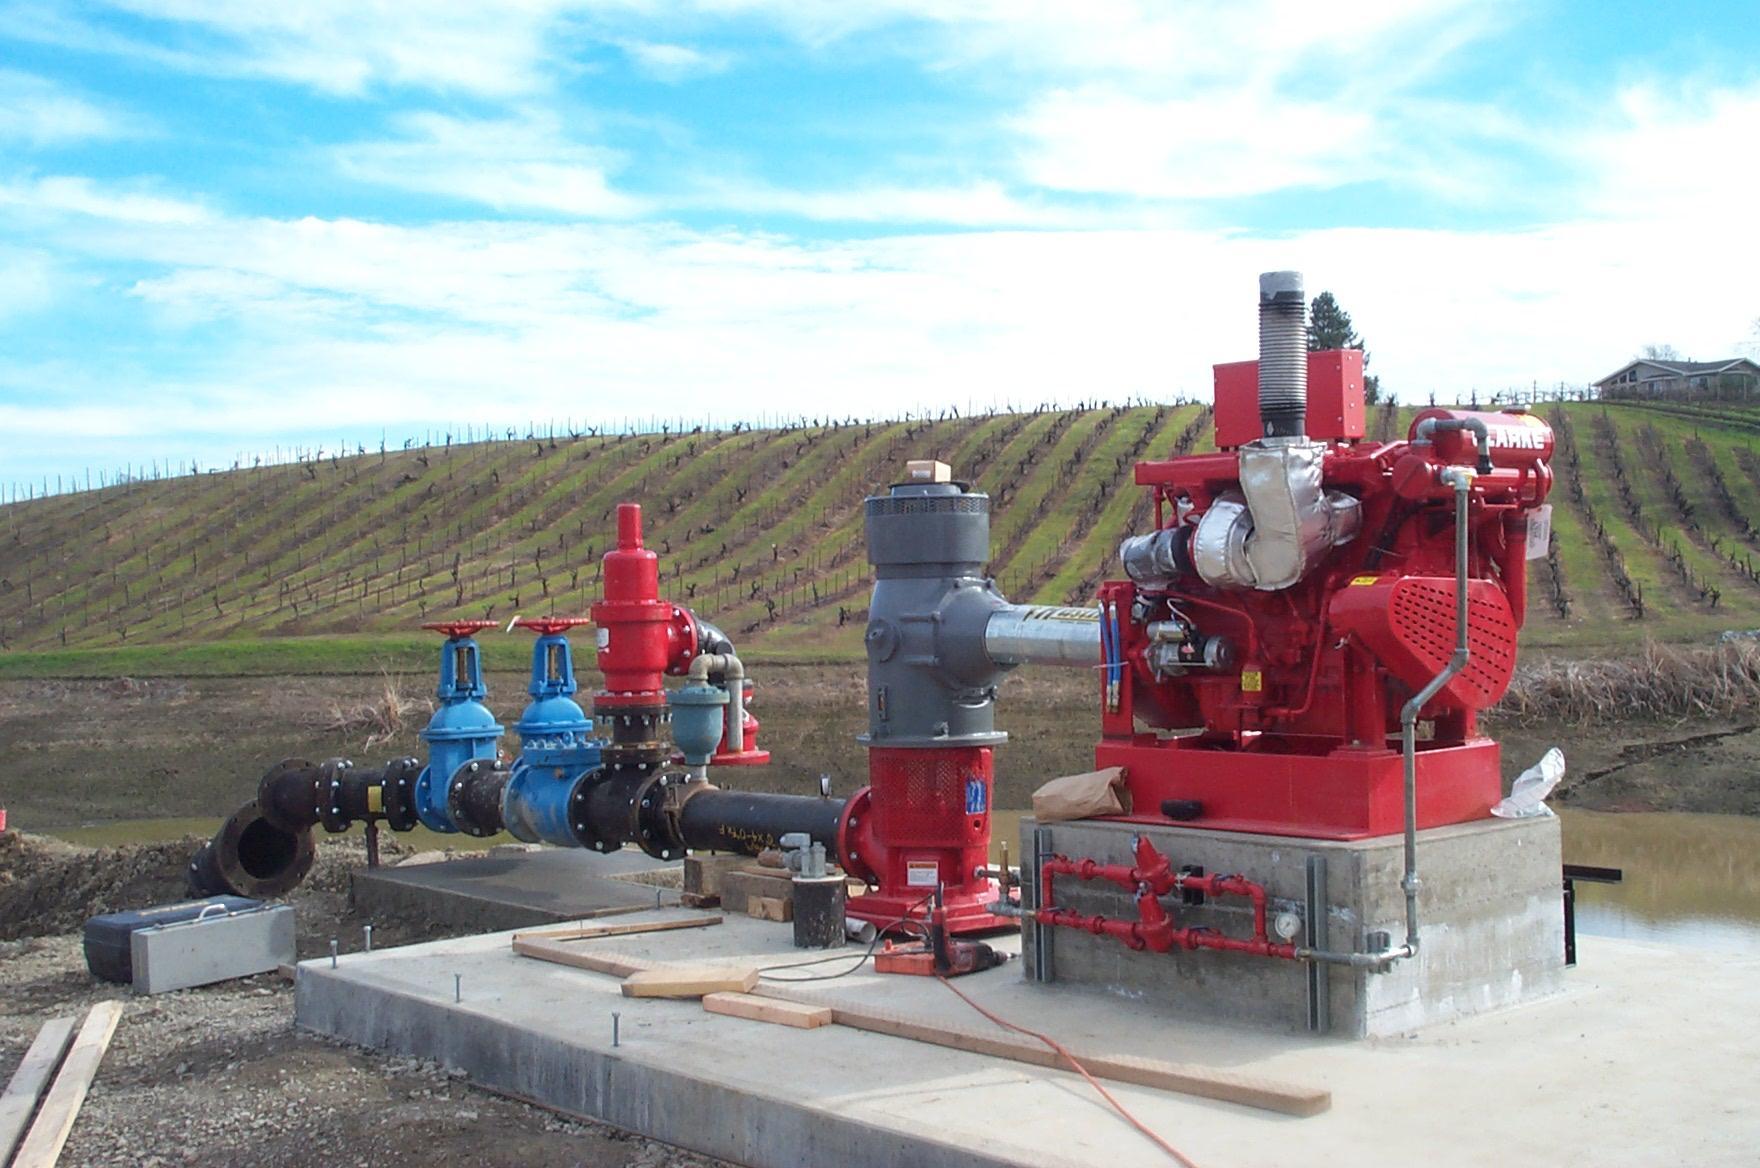 Groundwater Pump & Well provides irrigation and fire protection services for many of the vineyards in Sonoma such as this diesel fire pump at Ridge Winery.